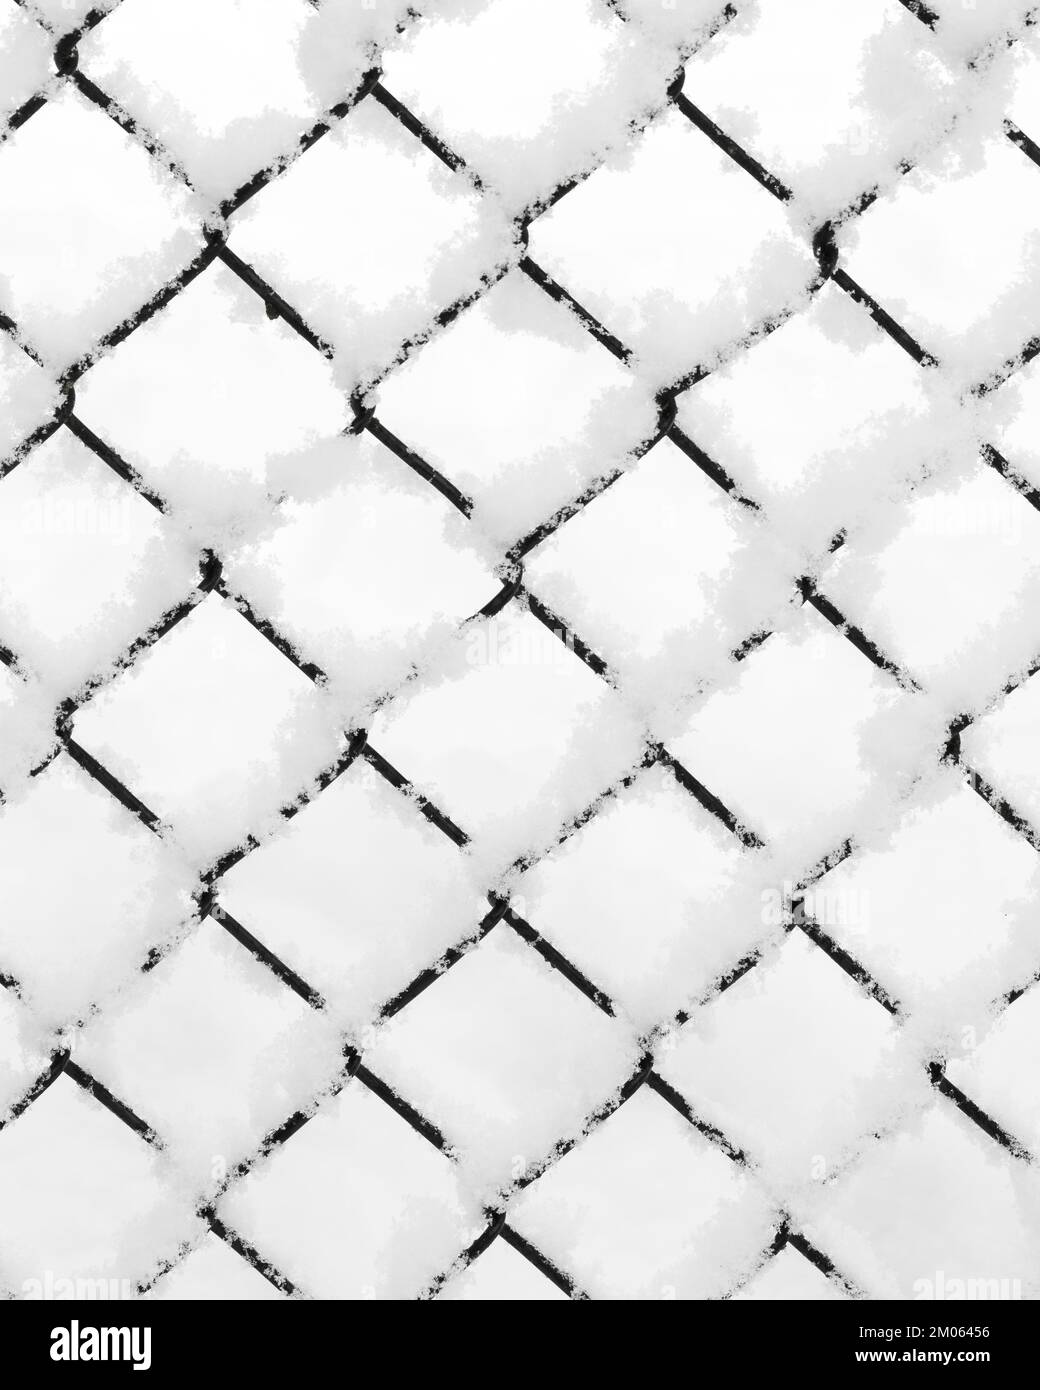 Snow piled on the wire of a diamond pattern mesh black fence in closeup during winter Stock Photo